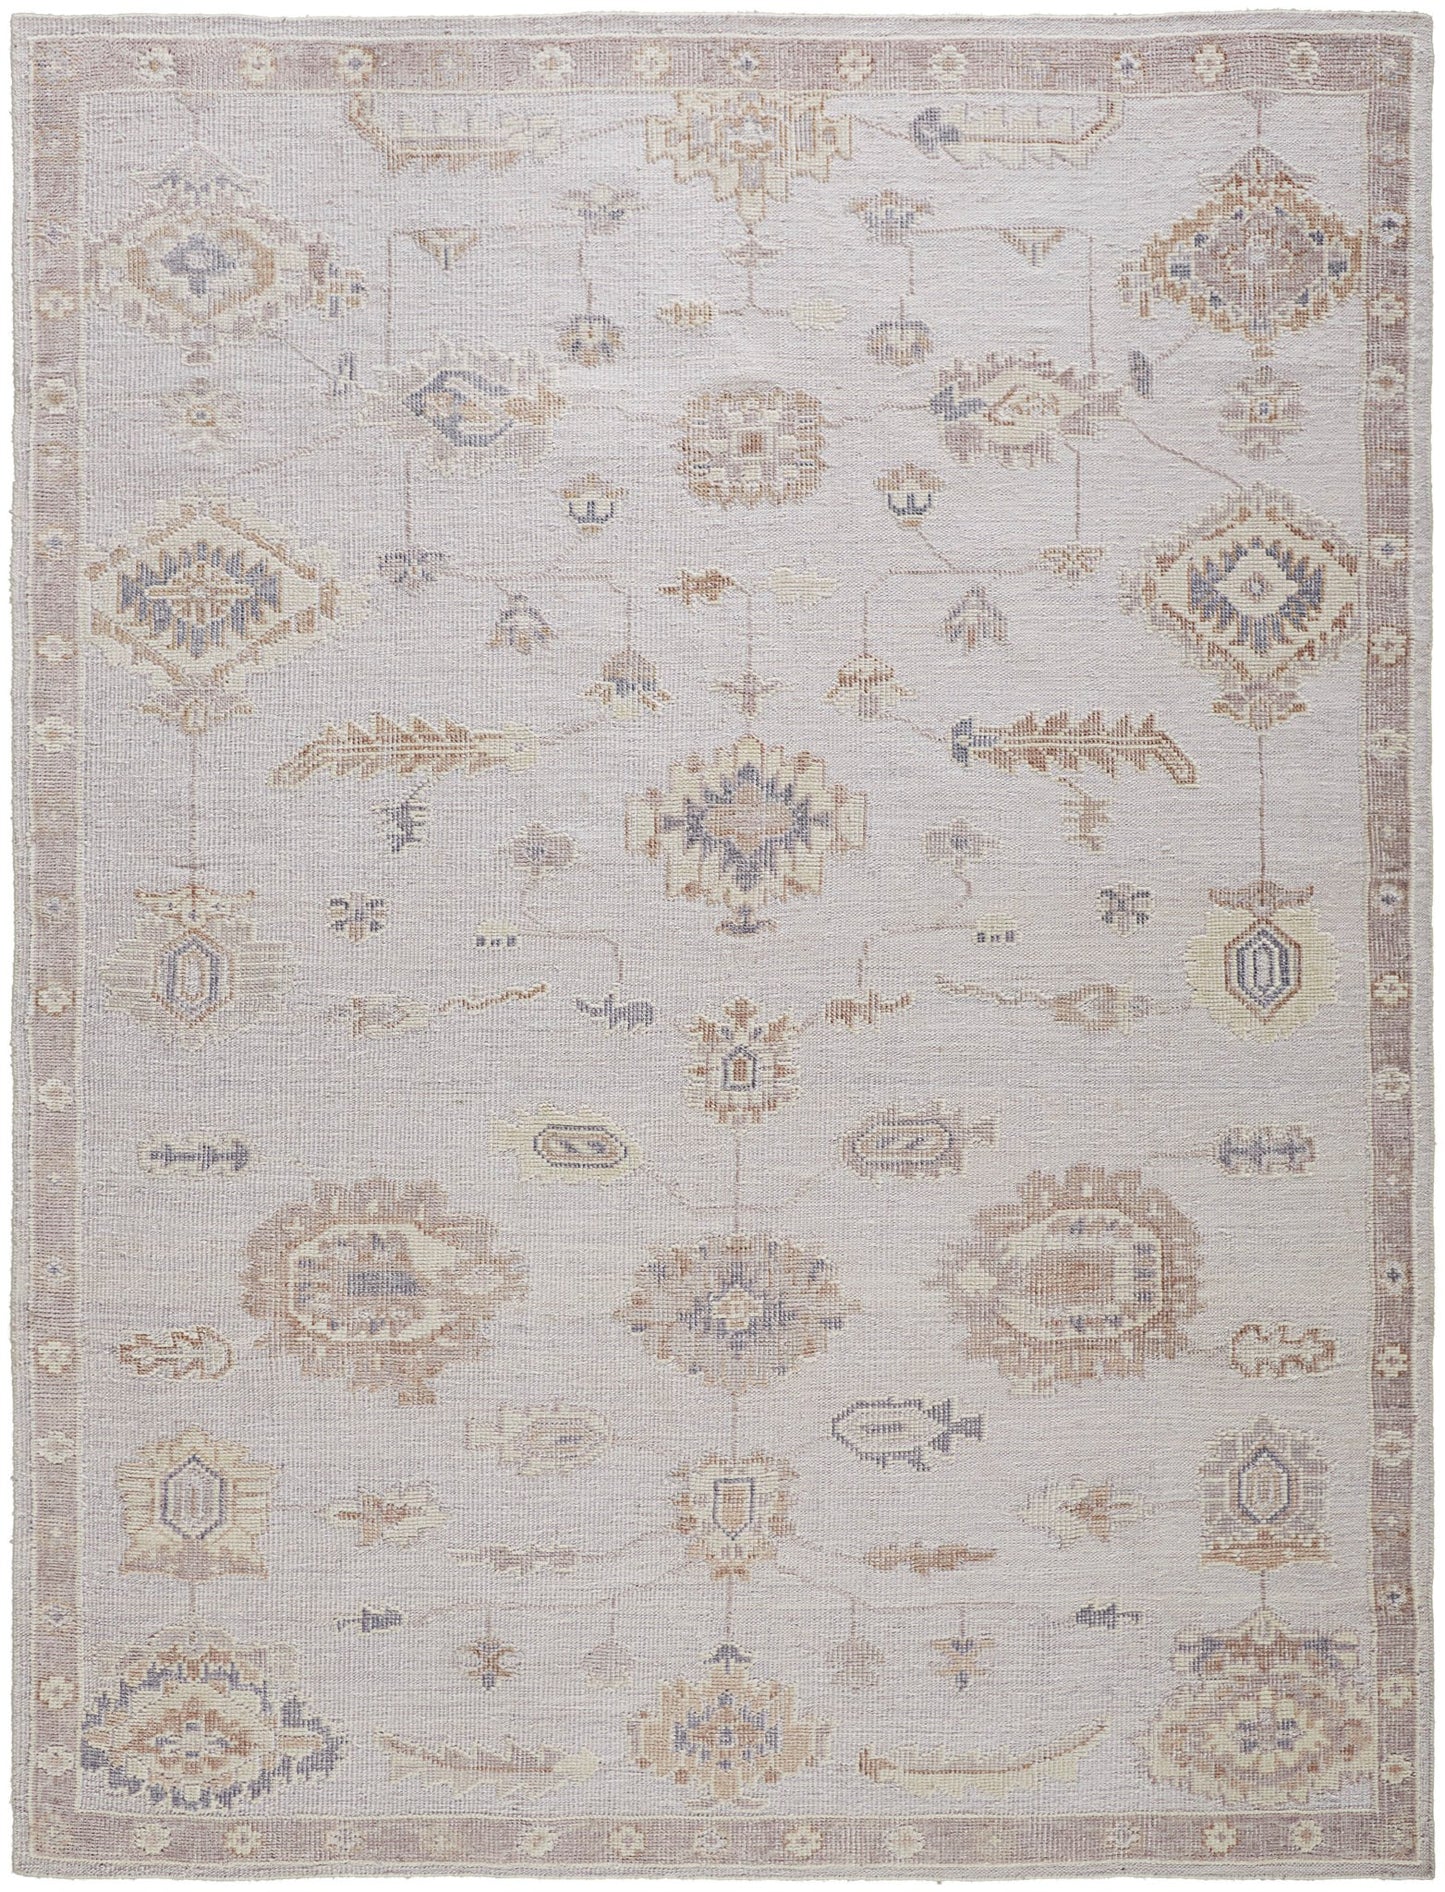 Indian  Handmade Rug With a Oushak Design product image #29092411179178